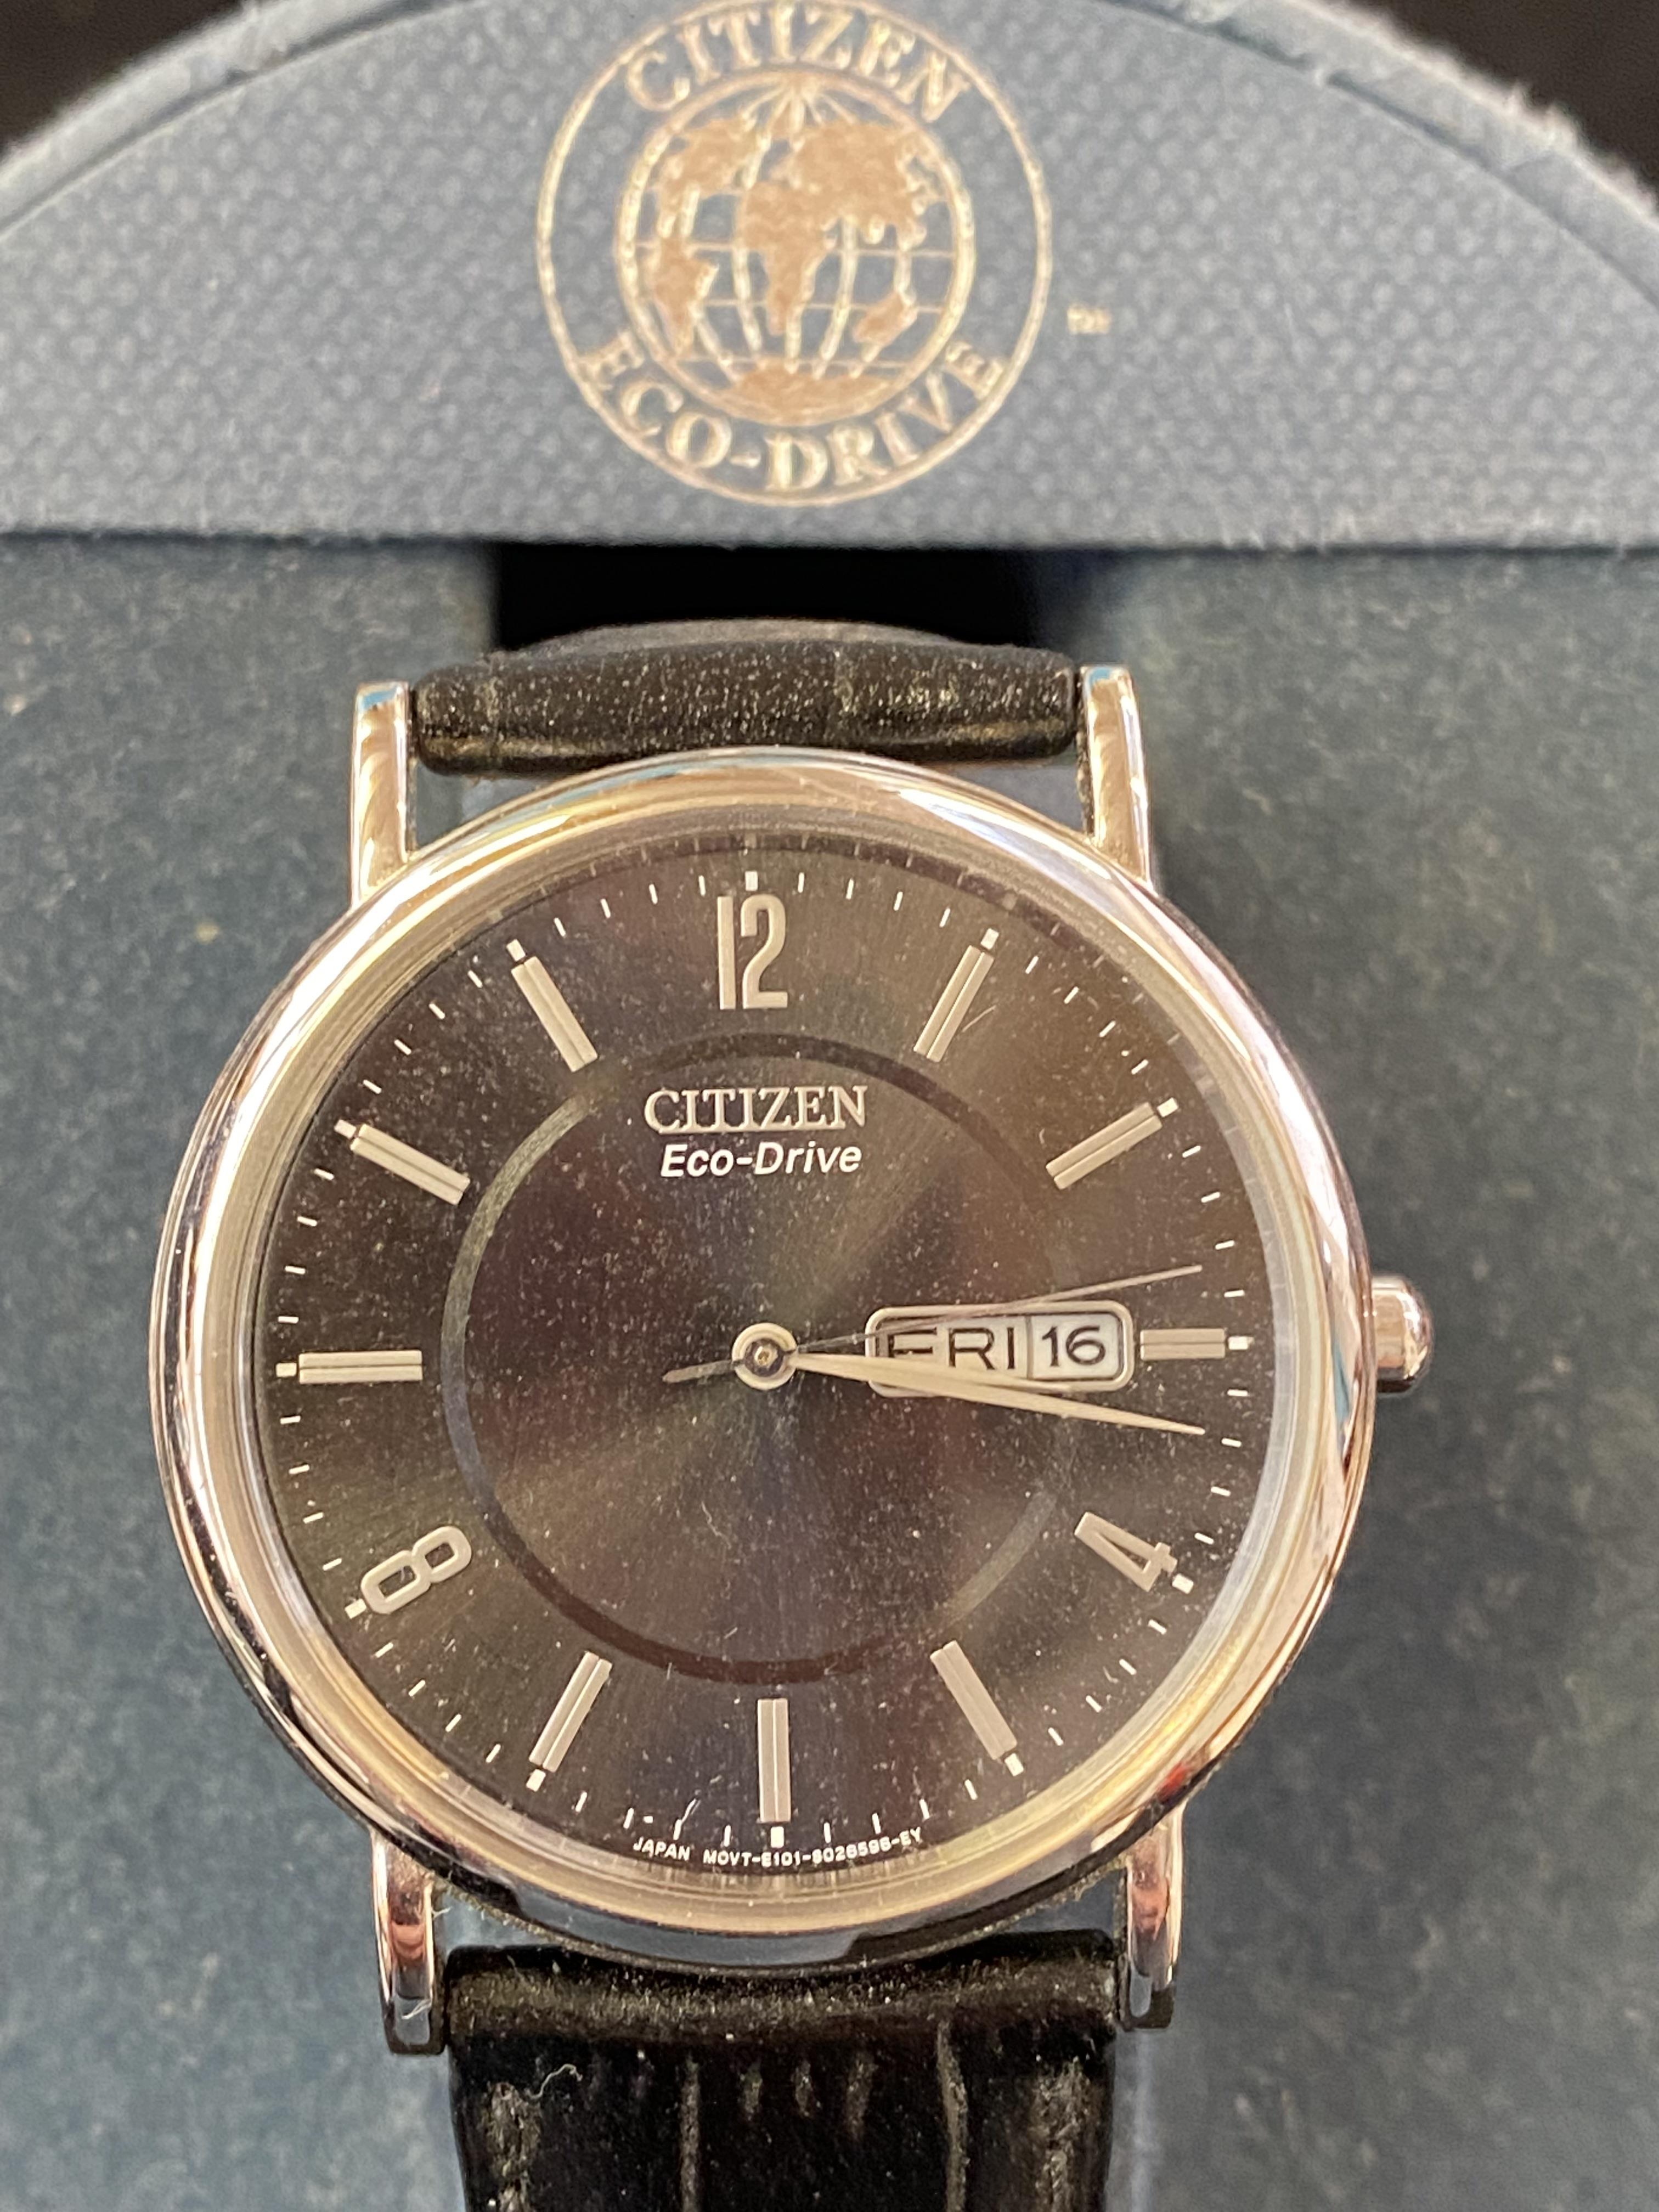 Citizen eco drive day/date wristwatch with box